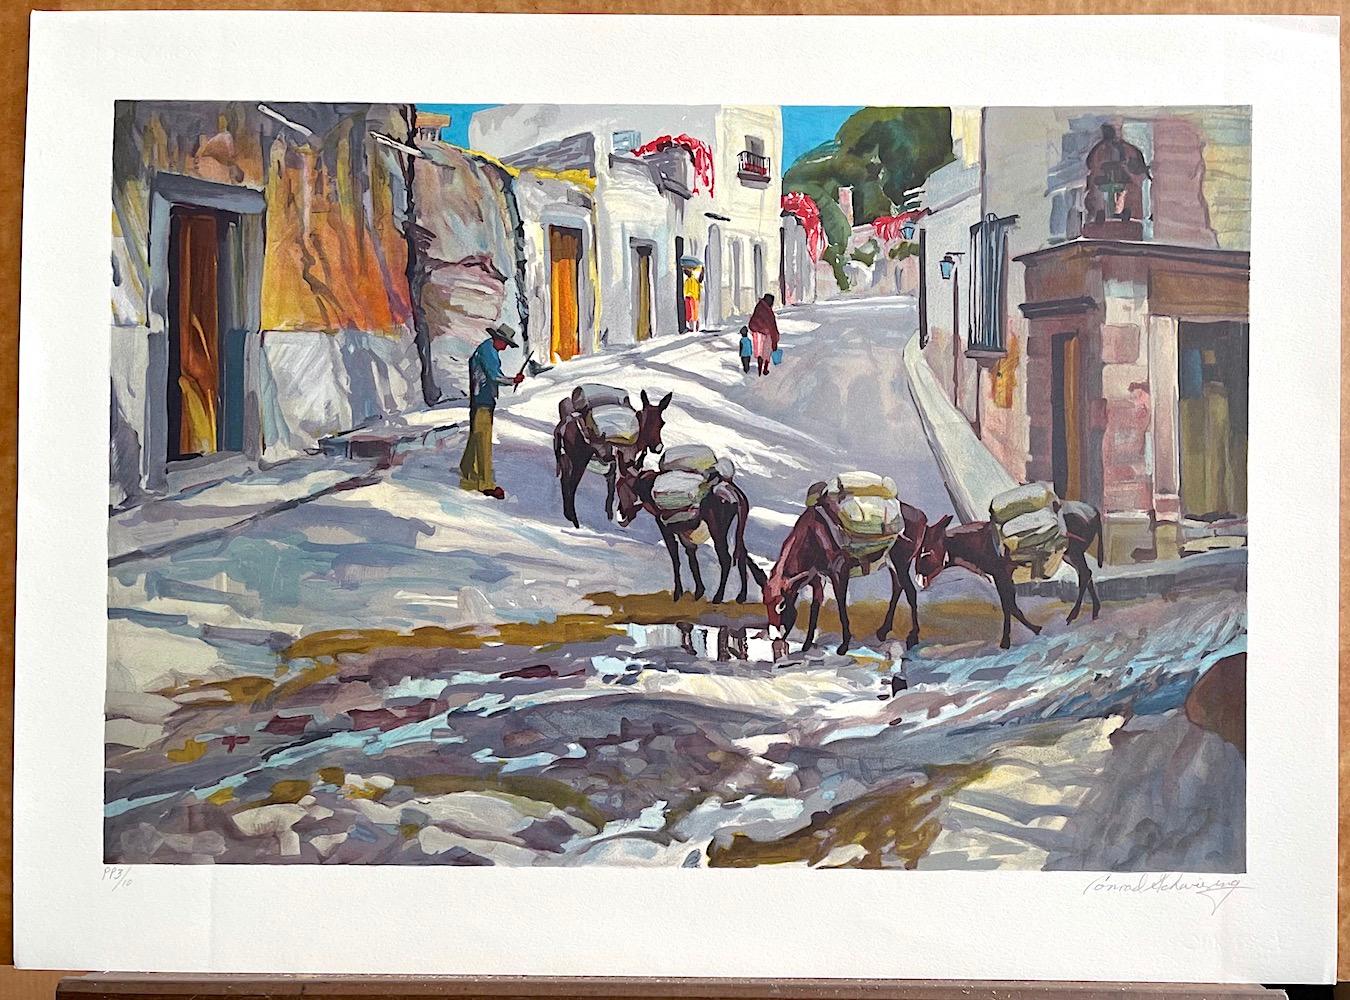 BURRO EXPRESS Signed Lithograph Street Scene Villagers, Donkeys, Southwest Art - American Realist Print by Conrad Schwiering